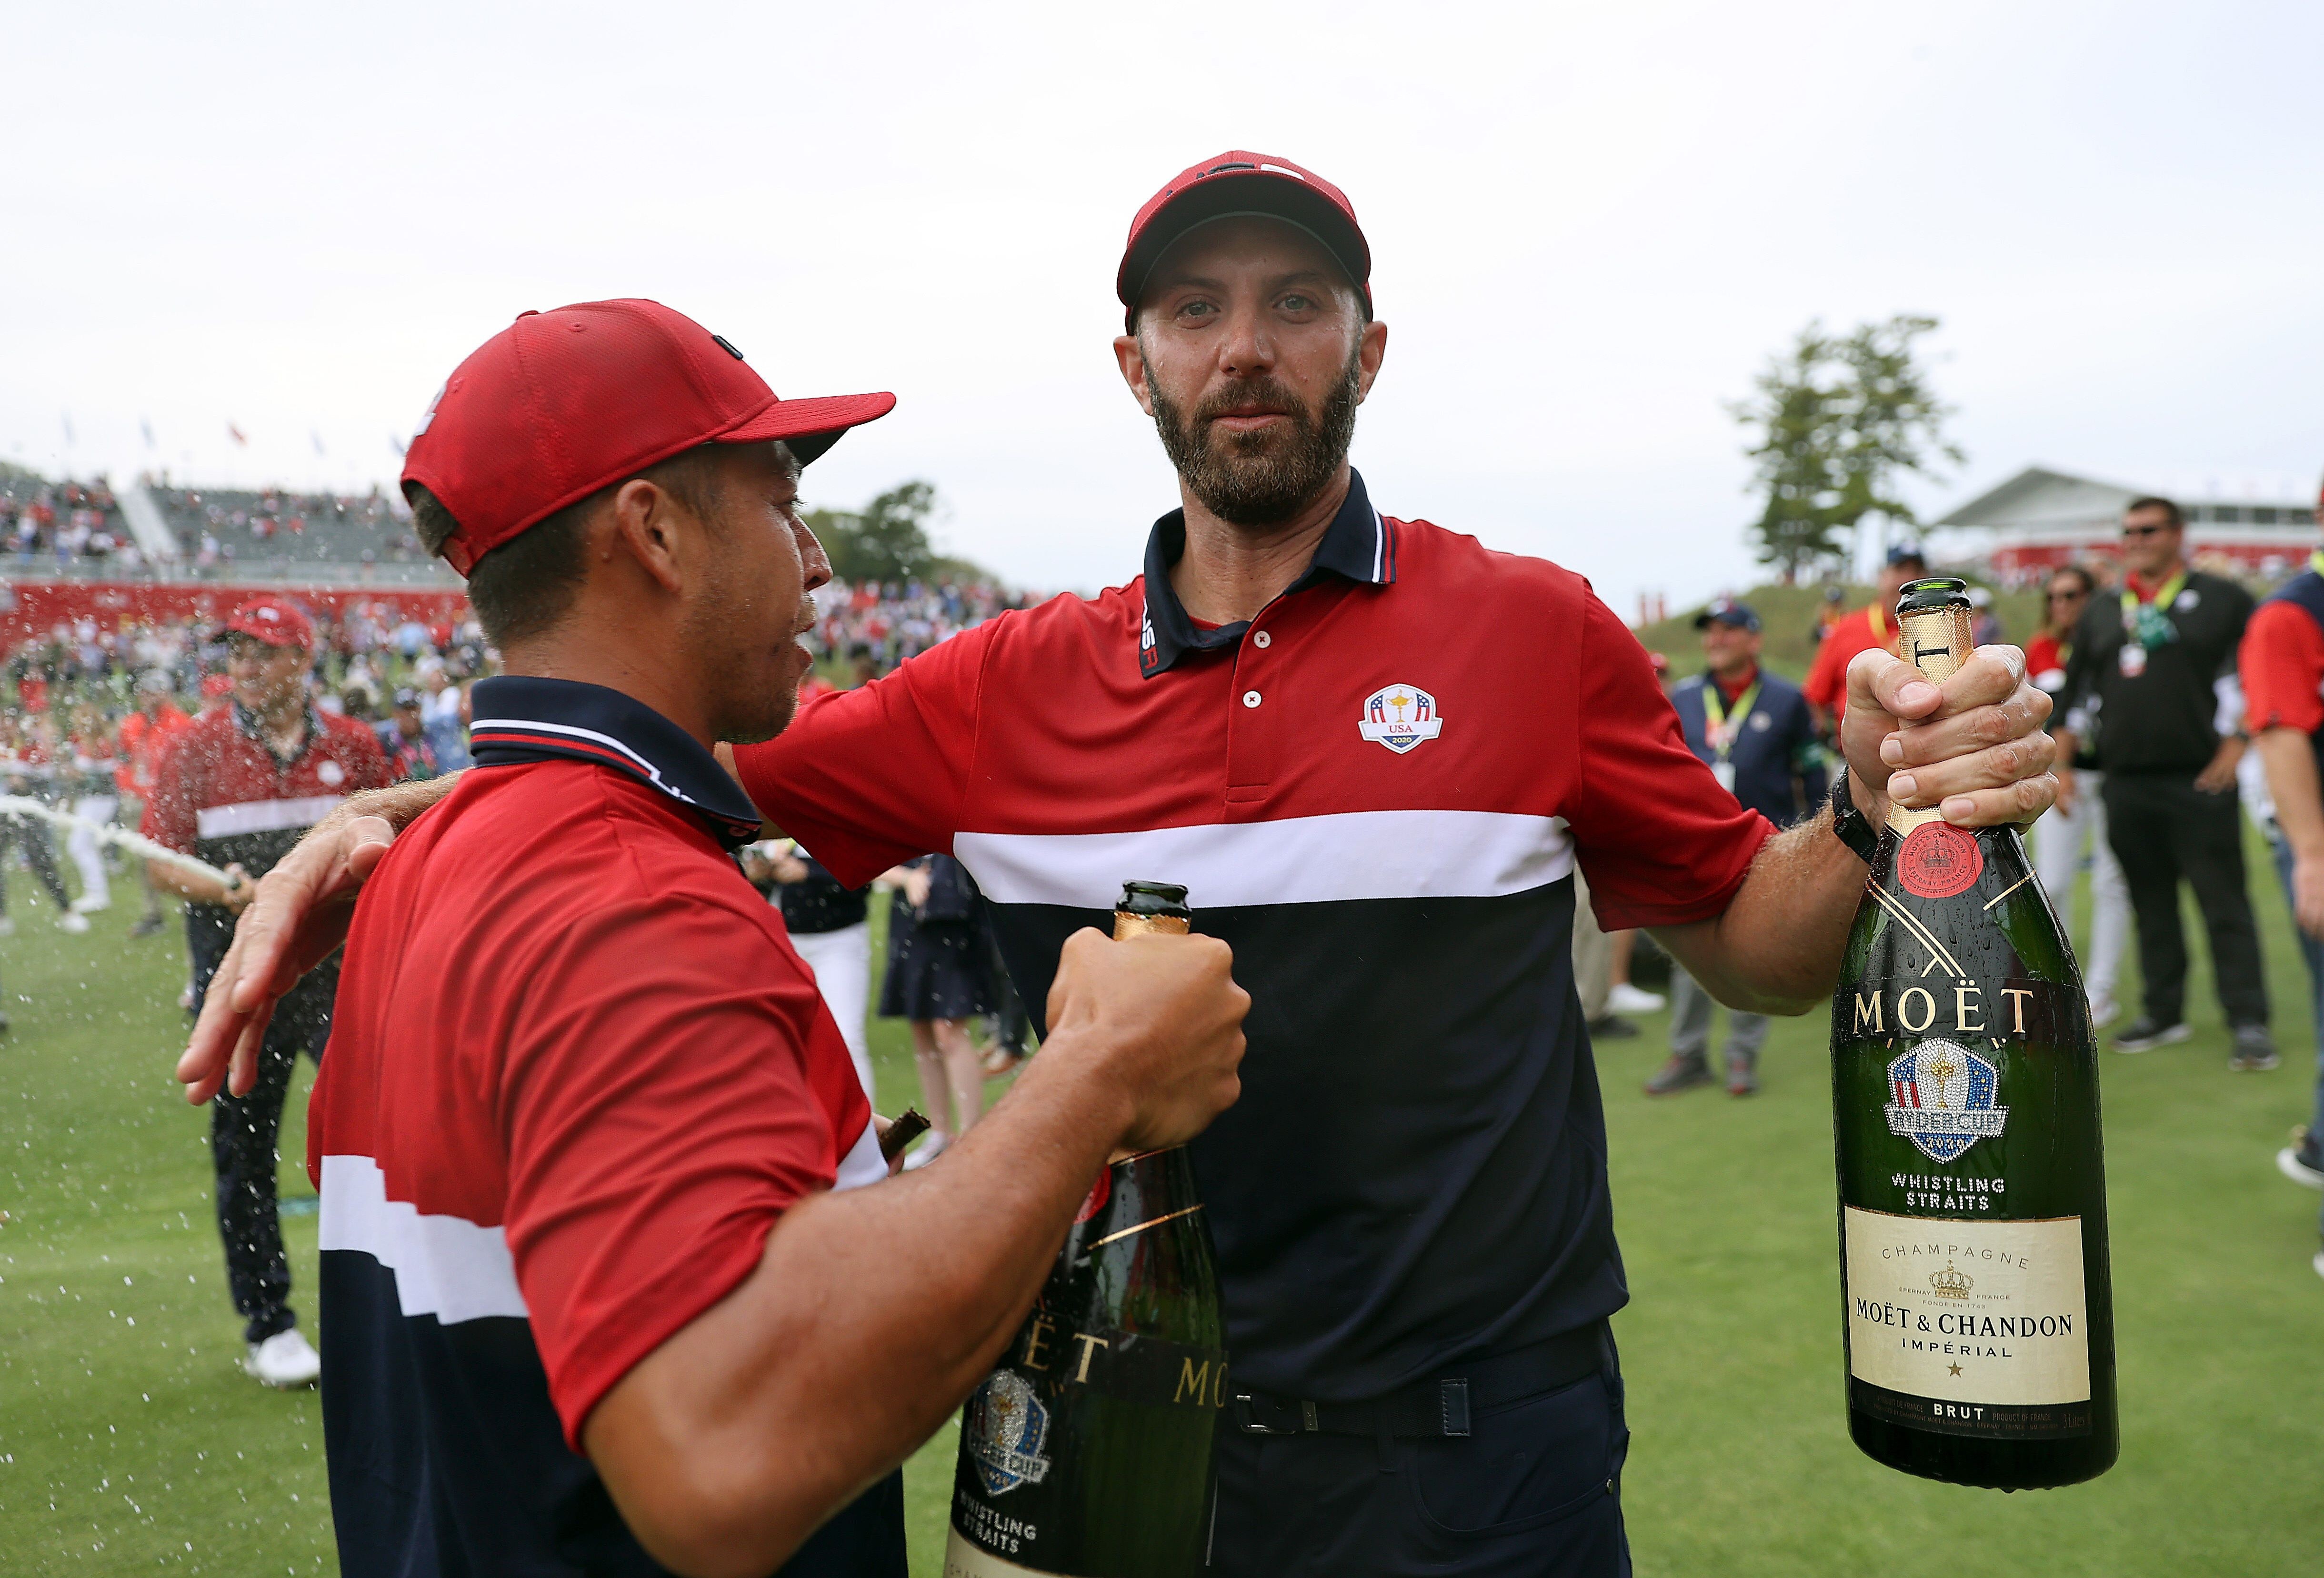 Dustin Johnson emerged victorious from all five matches he competed during the United States’ regaining of the Ryder Cup. Photo: AFP